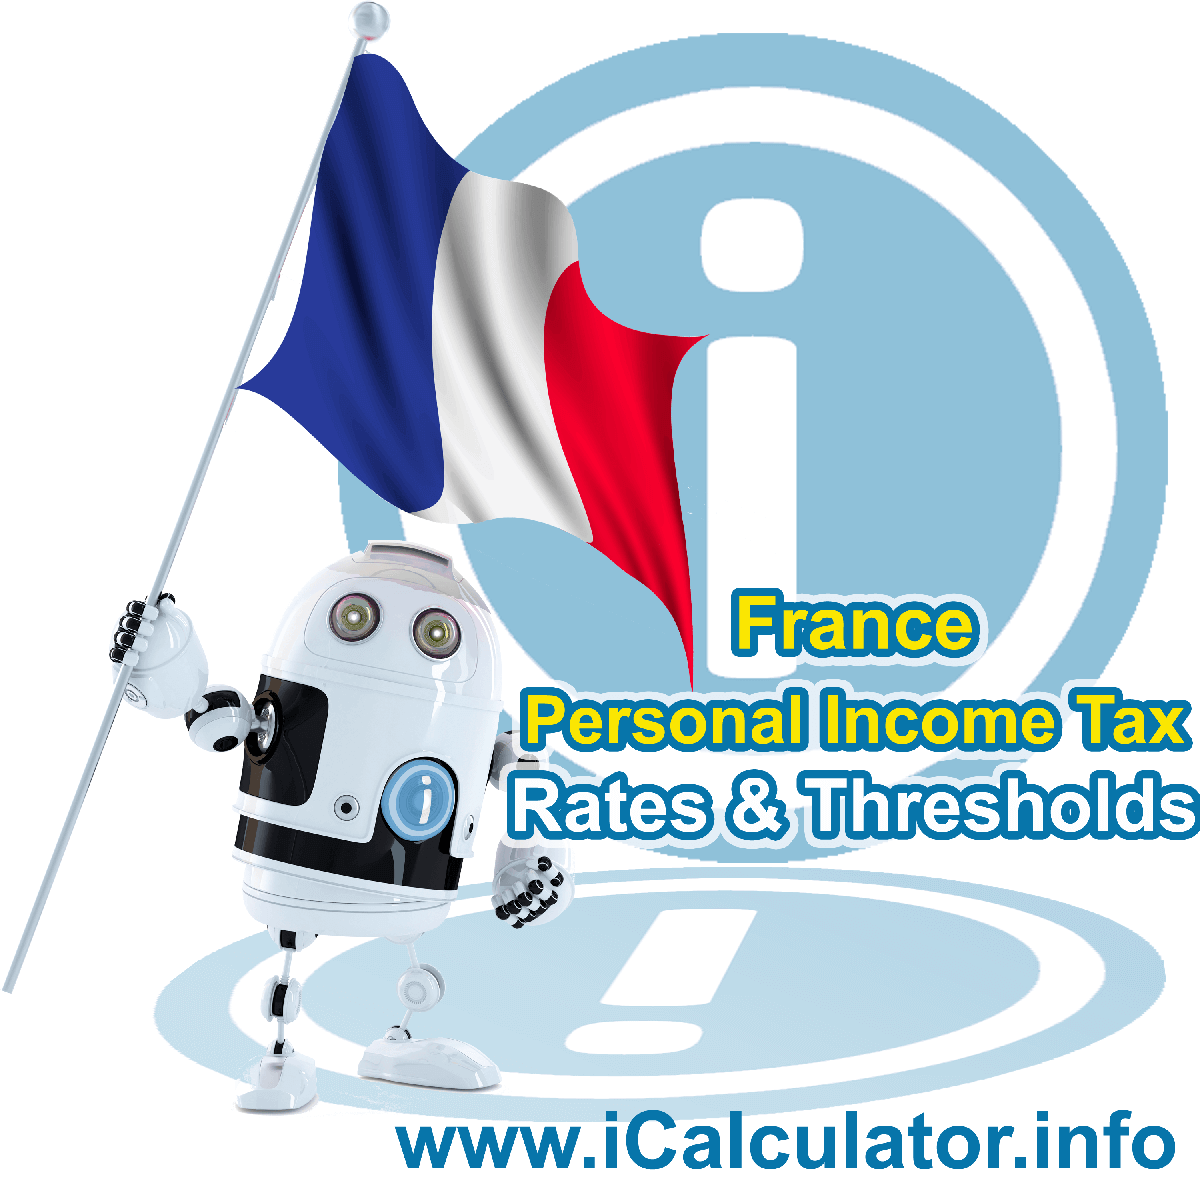 France Personal Income Tax Rates and Allowances in 2022. This image shows the France flag and information relating to the income tax formula and payroll formulas used for calculating income Tax in France using the France personal income tax rates, thresholds and allowances in 2023